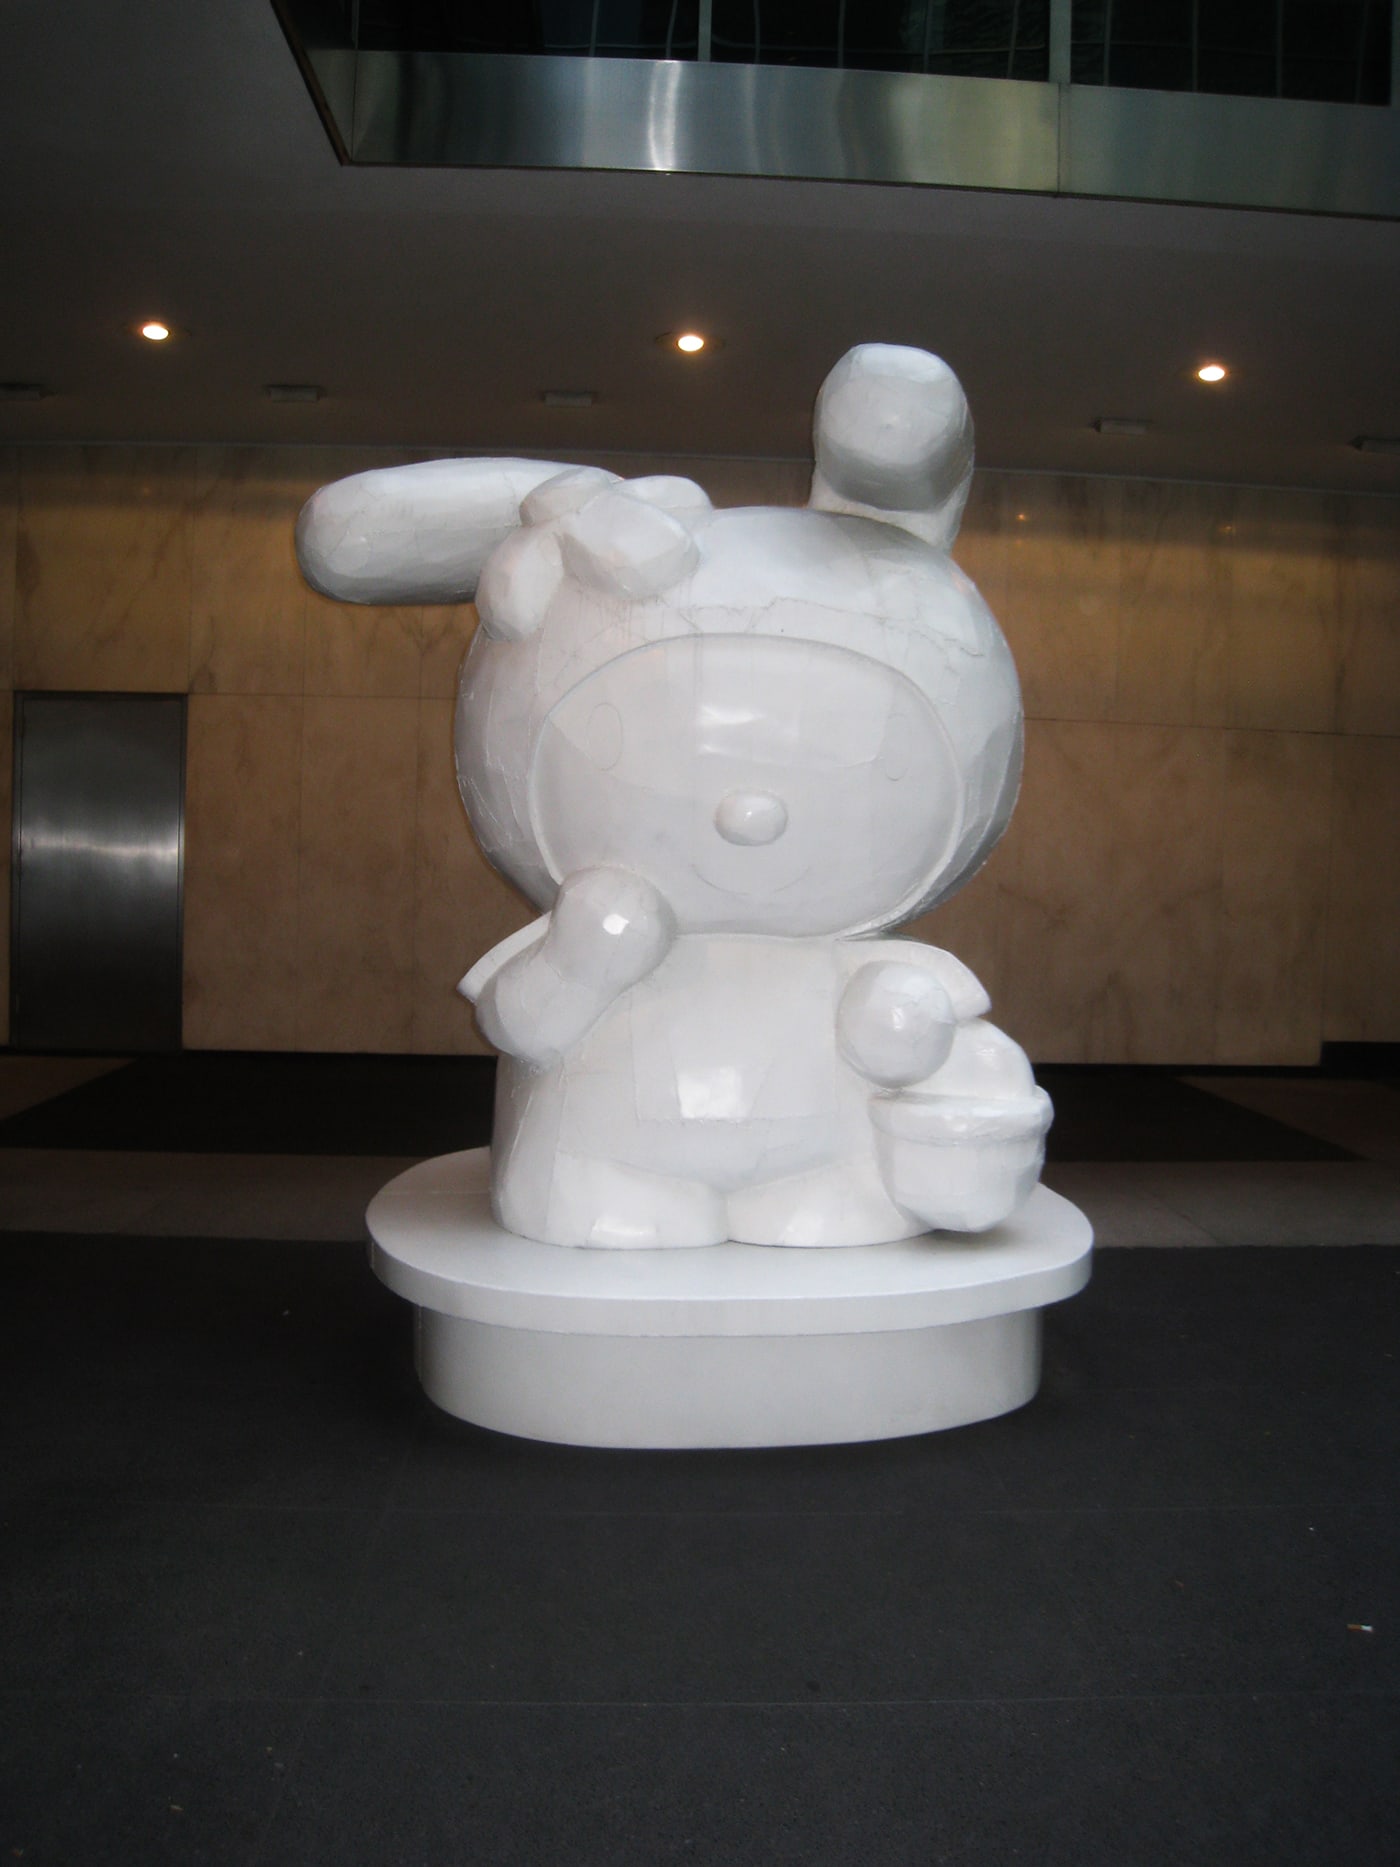 My Melody Hello Kitty Statues at the Lever House Art Collection in New York City.